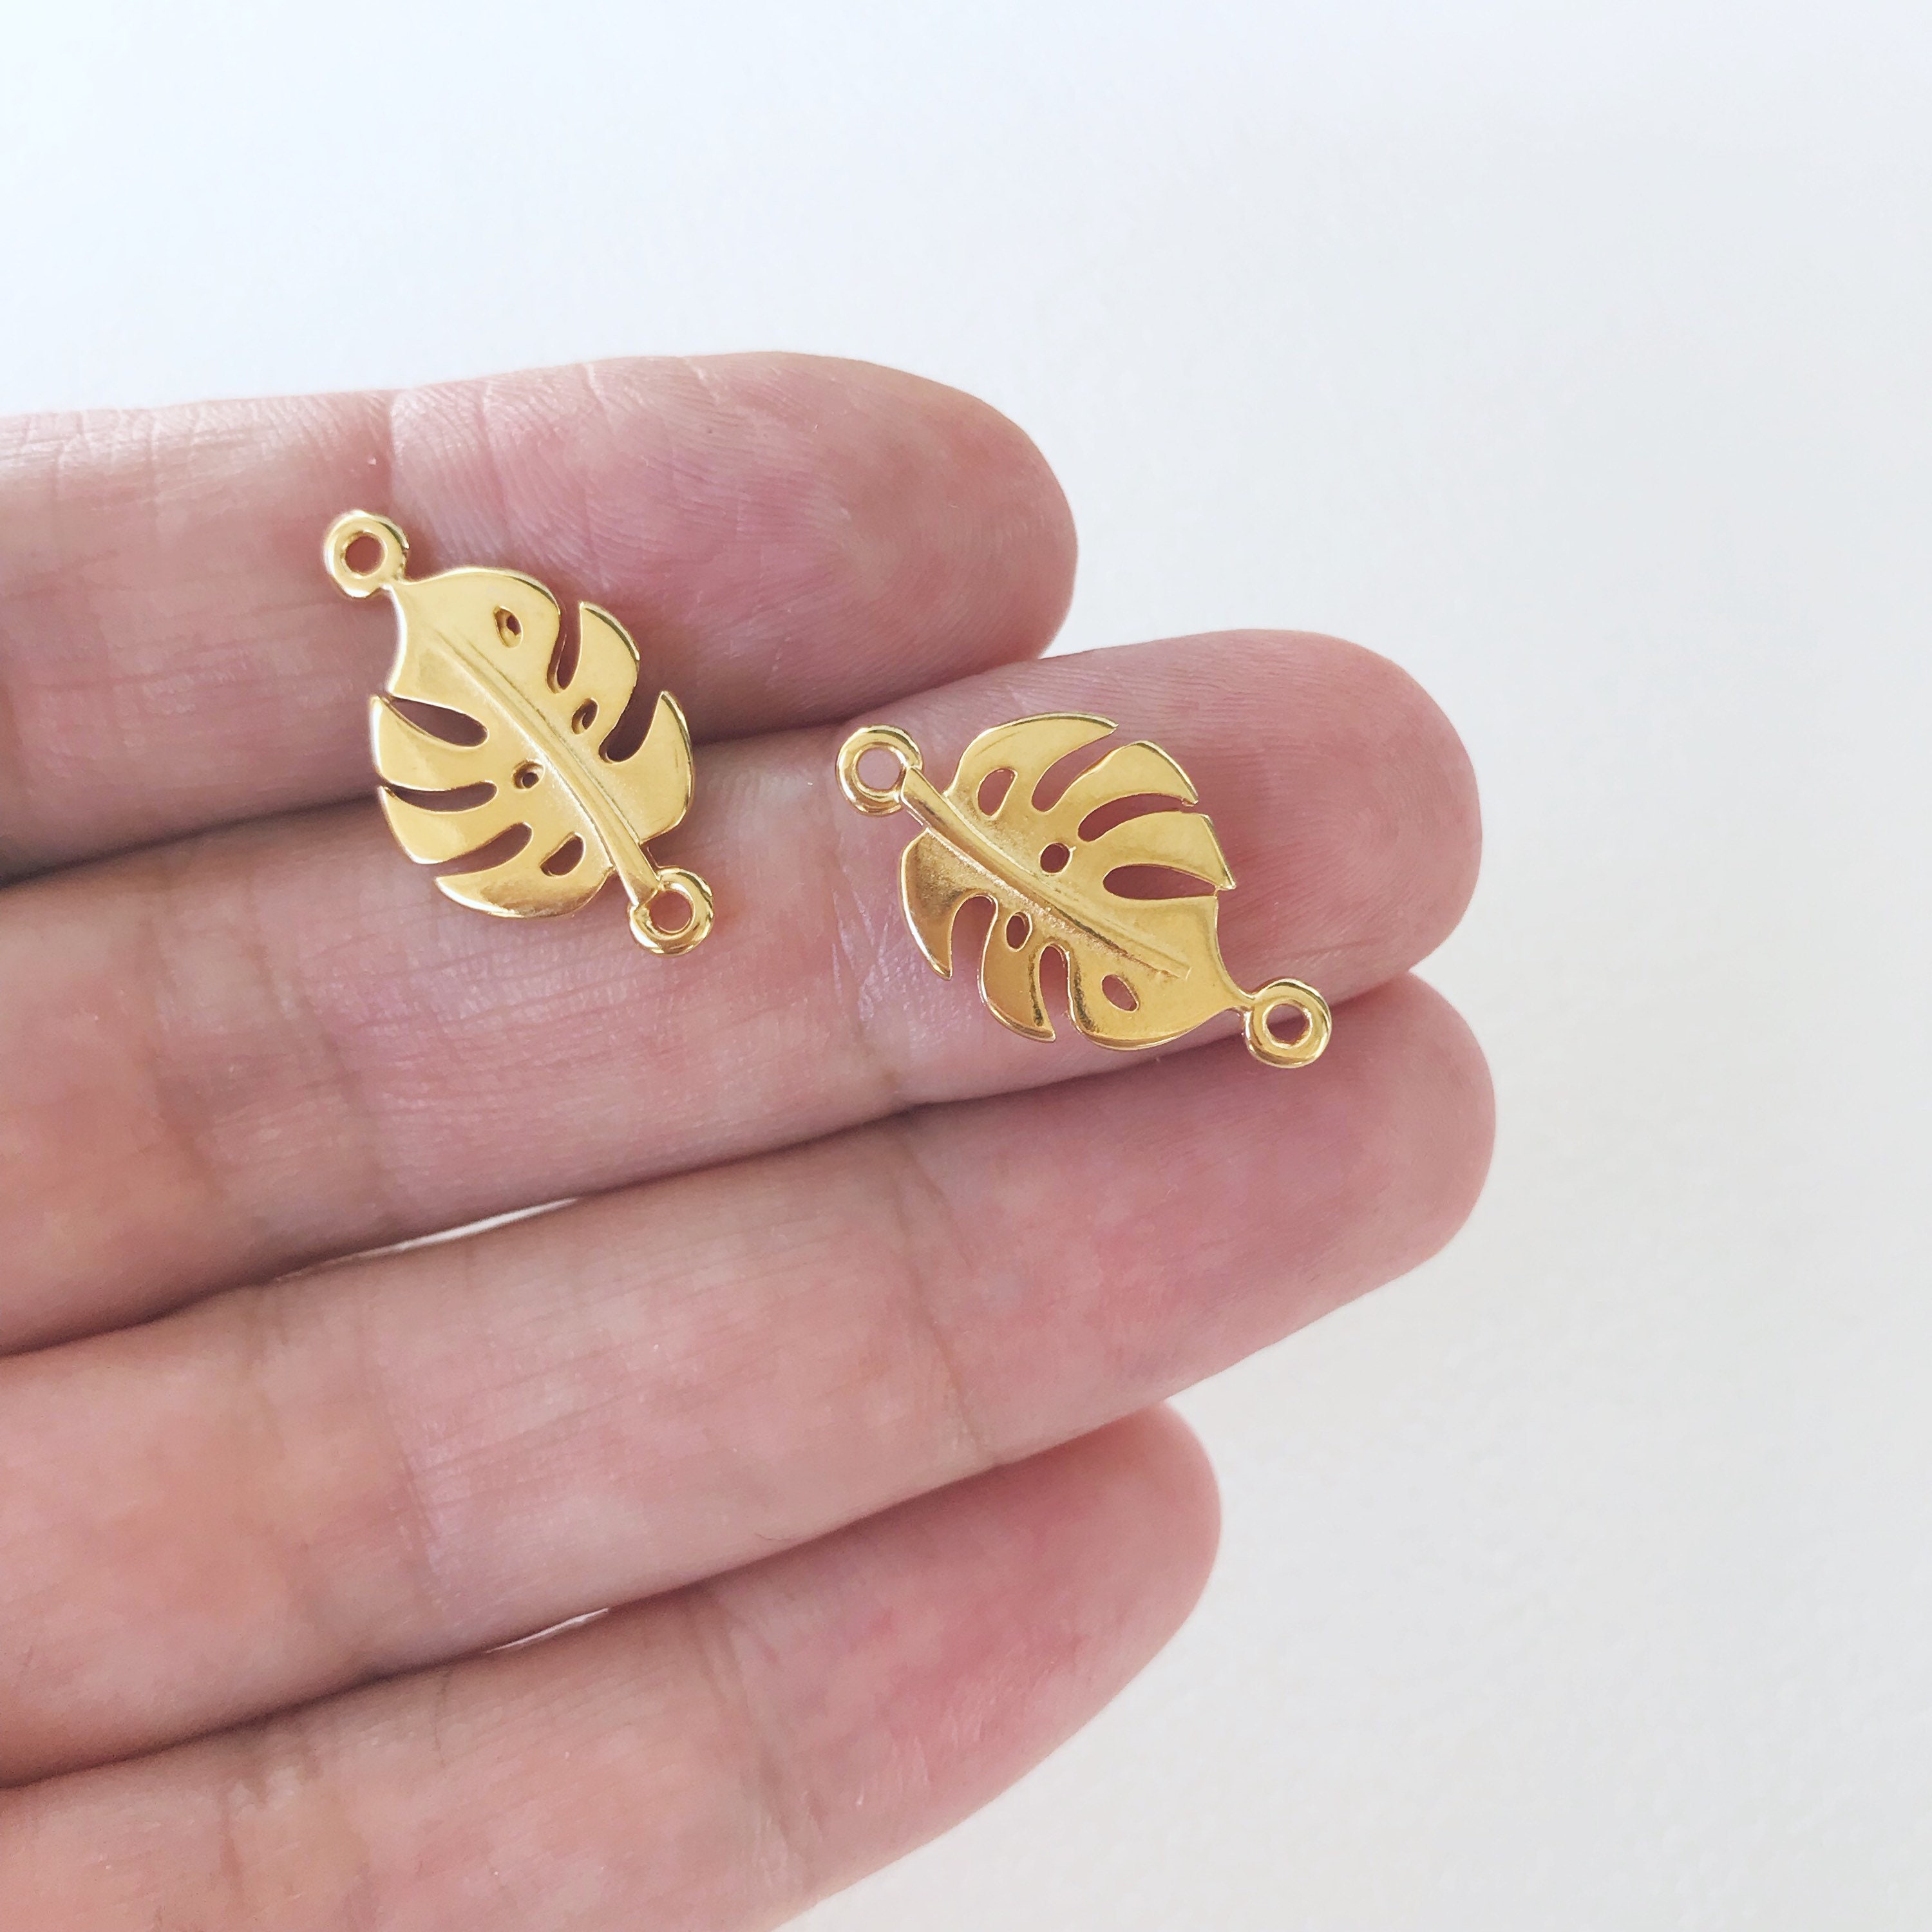 Monstera Leaf Charm Size 2.3cm 24K Gold Plated Charms Metal | Etsy